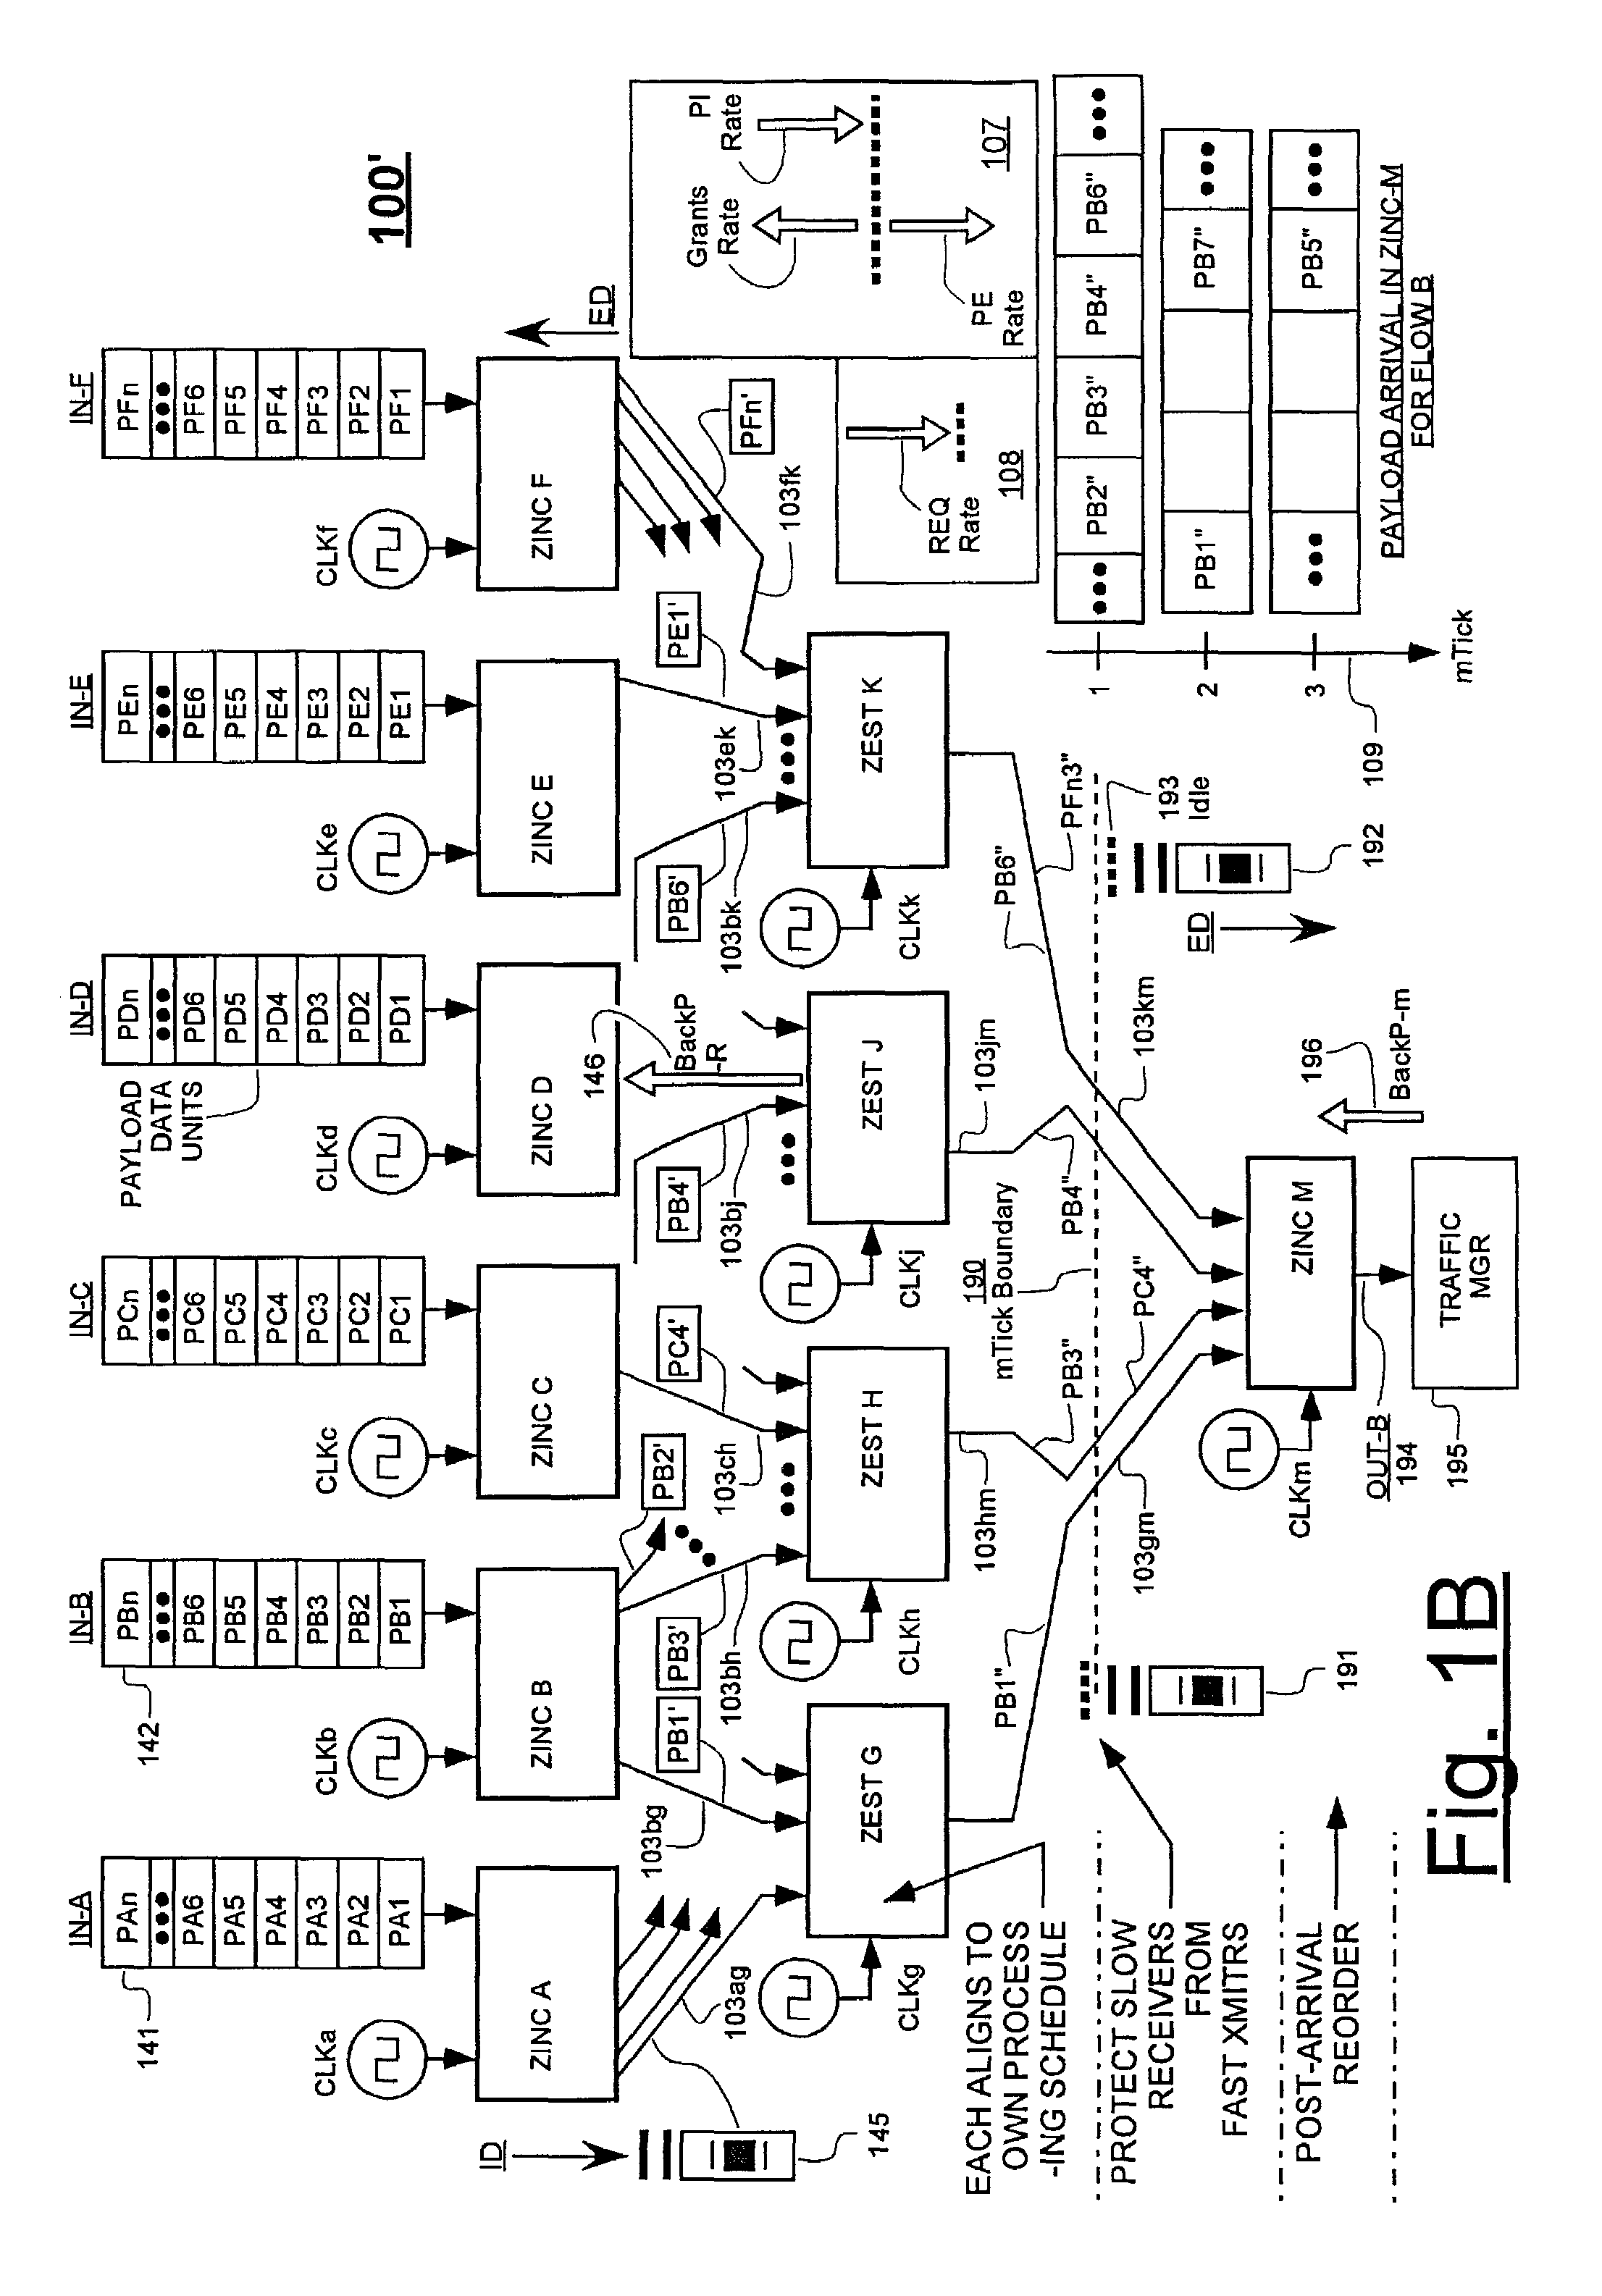 Variably delayable transmission of packets between independently clocked source, intermediate, and destination circuits while maintaining orderly and timely processing in one or both of the intermediate and destination circuits